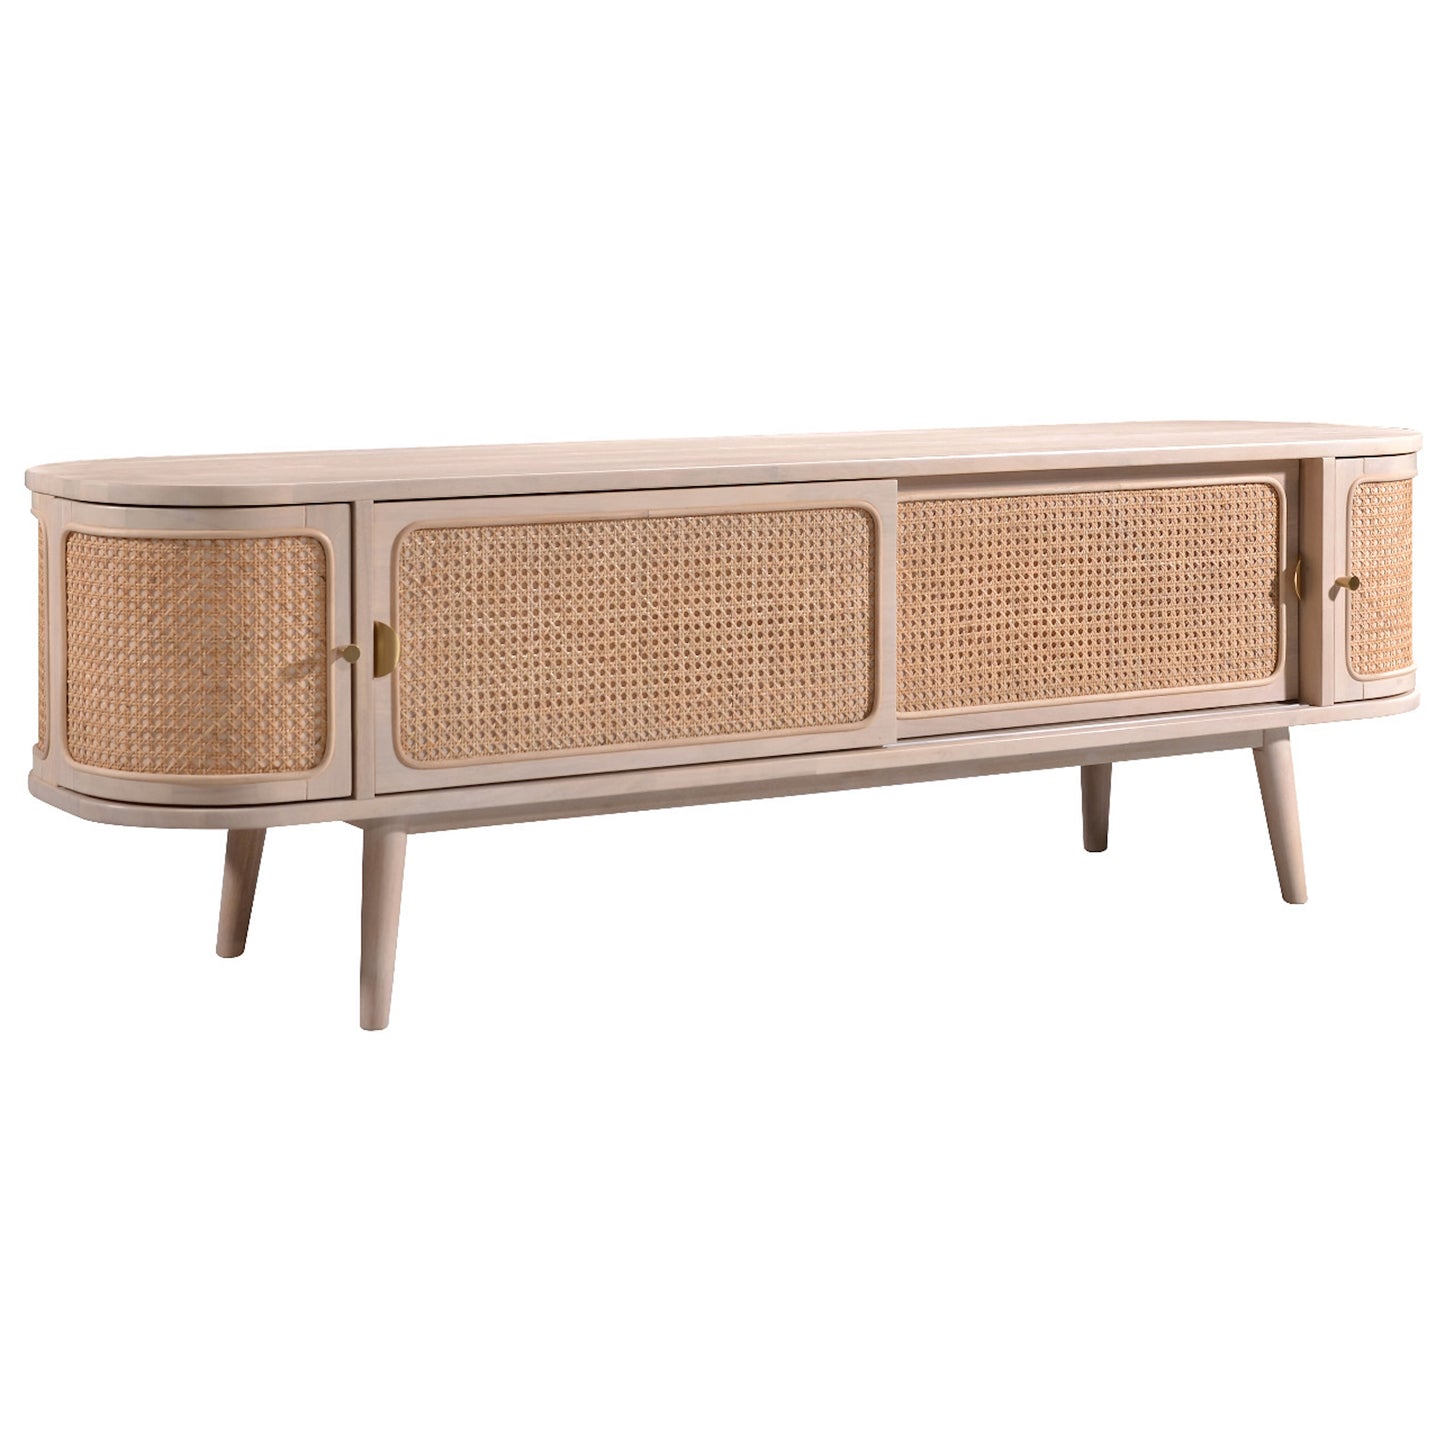 Criterion Jurien Entertainment Unit, TV Cabinet 1800mm Semi-Assembled, Solid Rubber Wood Construction Rattan and White Chocolate